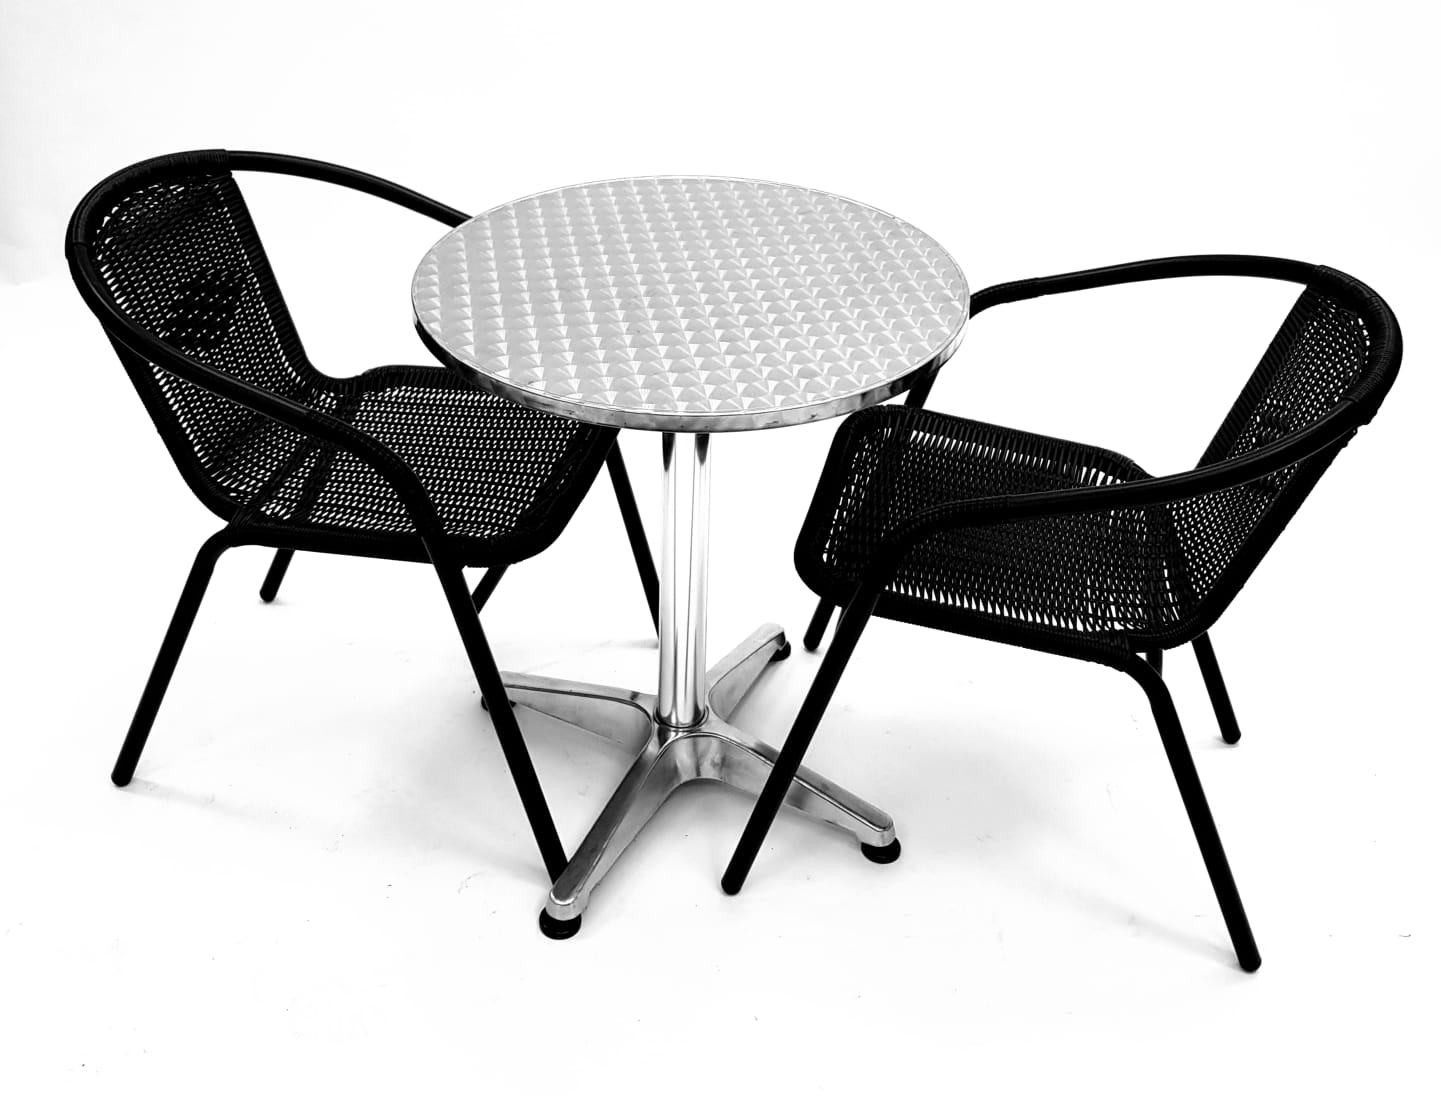 Black Rattan Garden Sets with 2 Chairs & Aluminium Table - BE Furniture